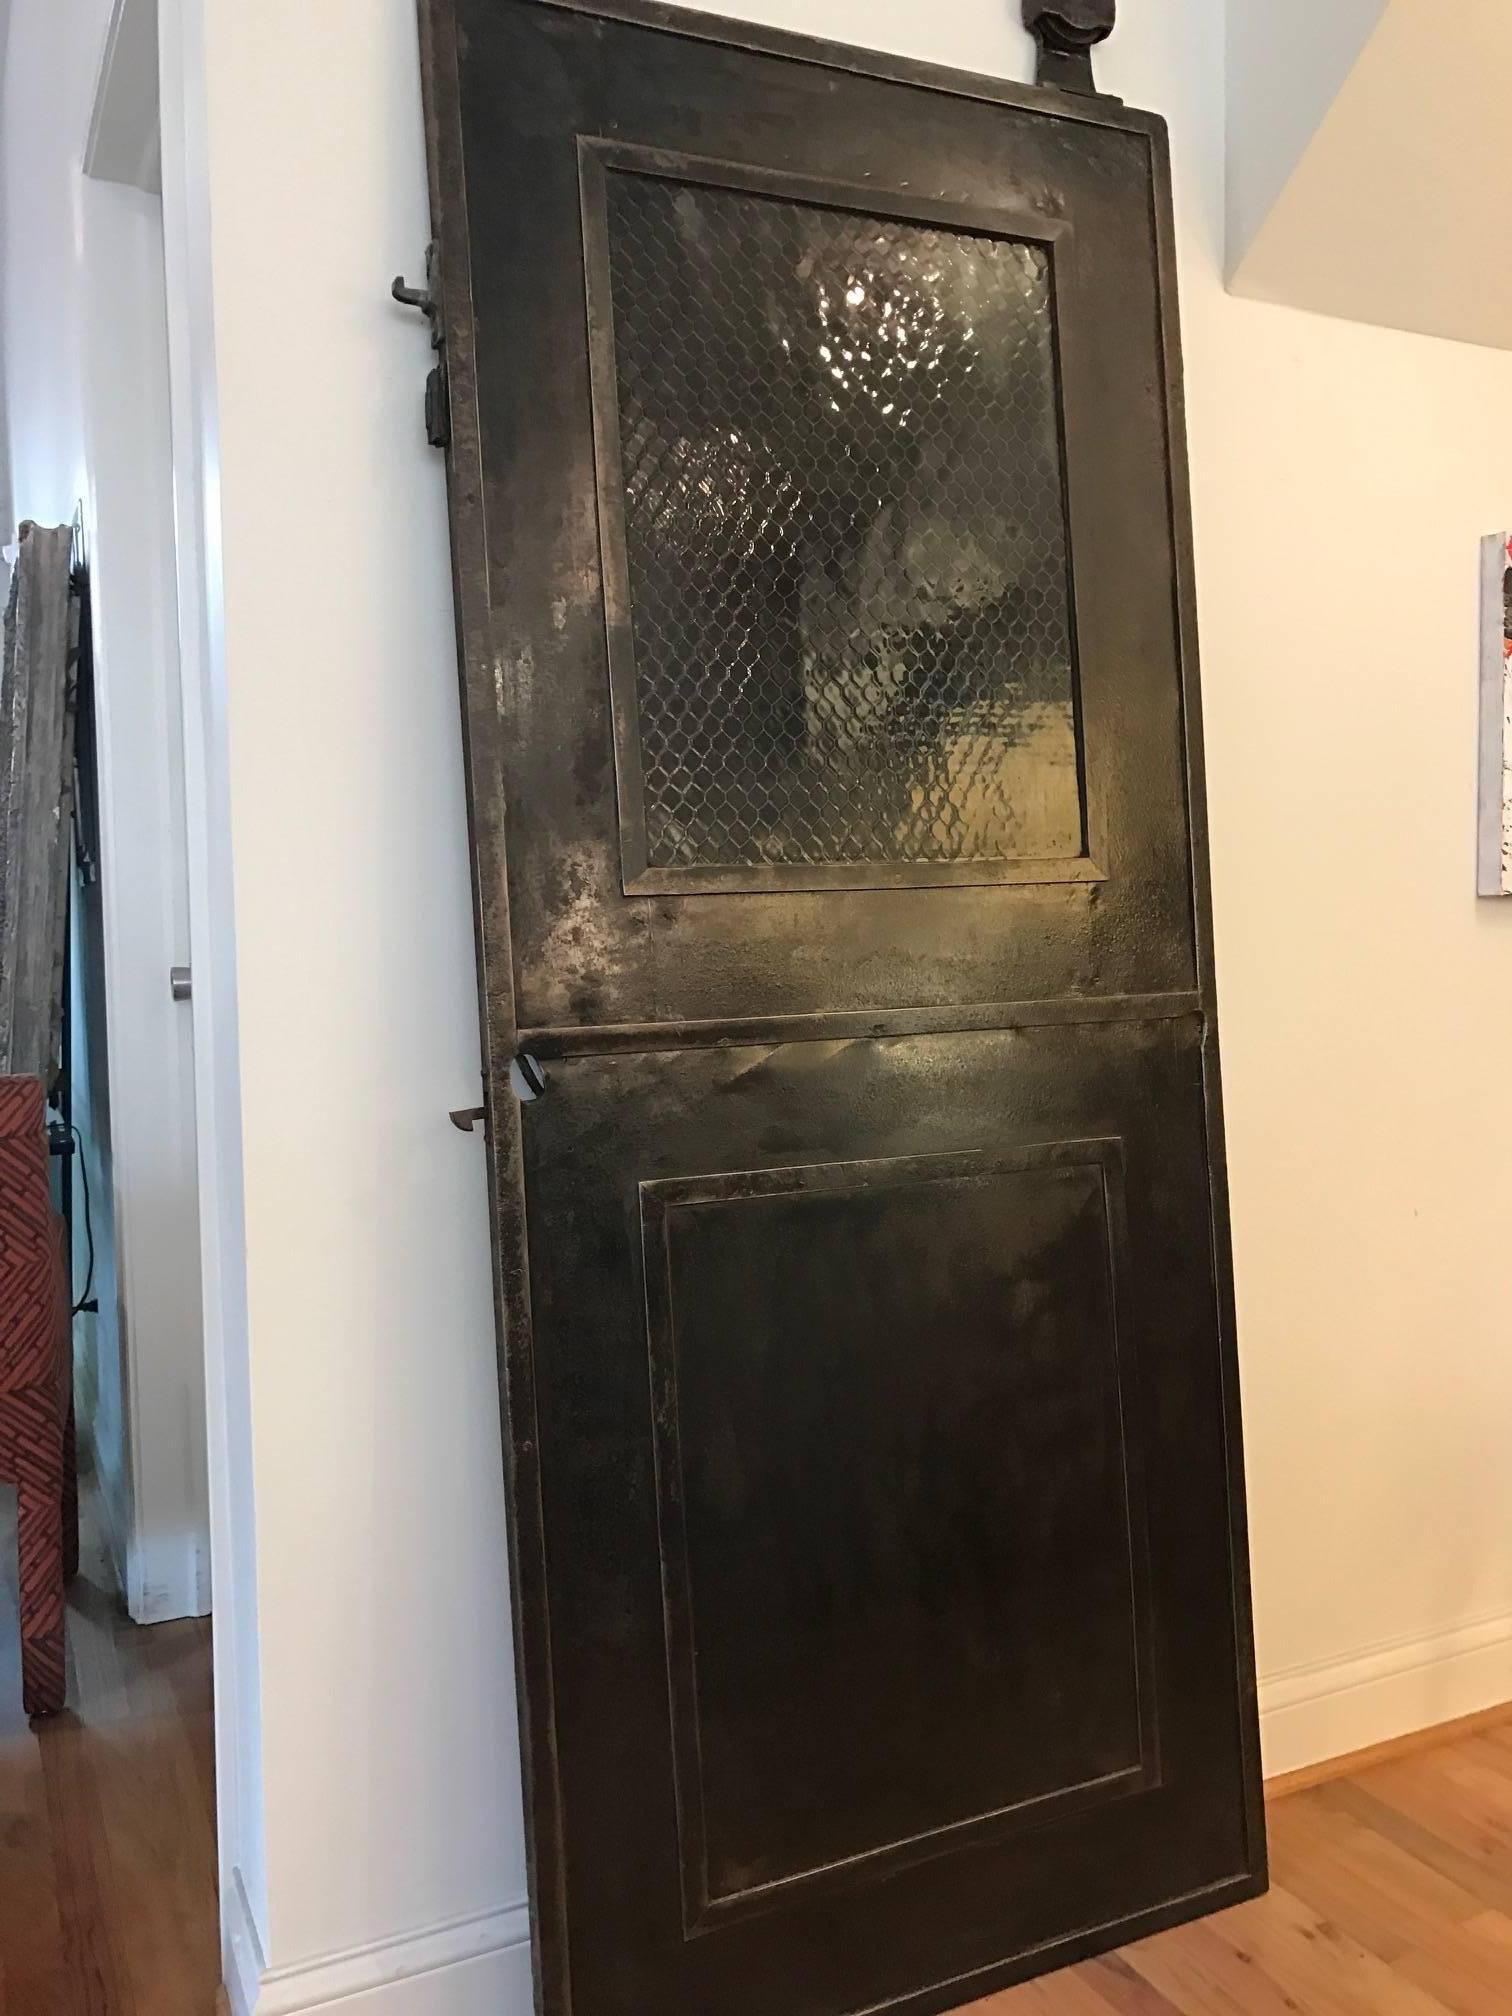 A polished Industrial metal fire door with safety glass. The door was manufactured by Harris & Reed in Chicago. Wonderful in a Steampunk interior.